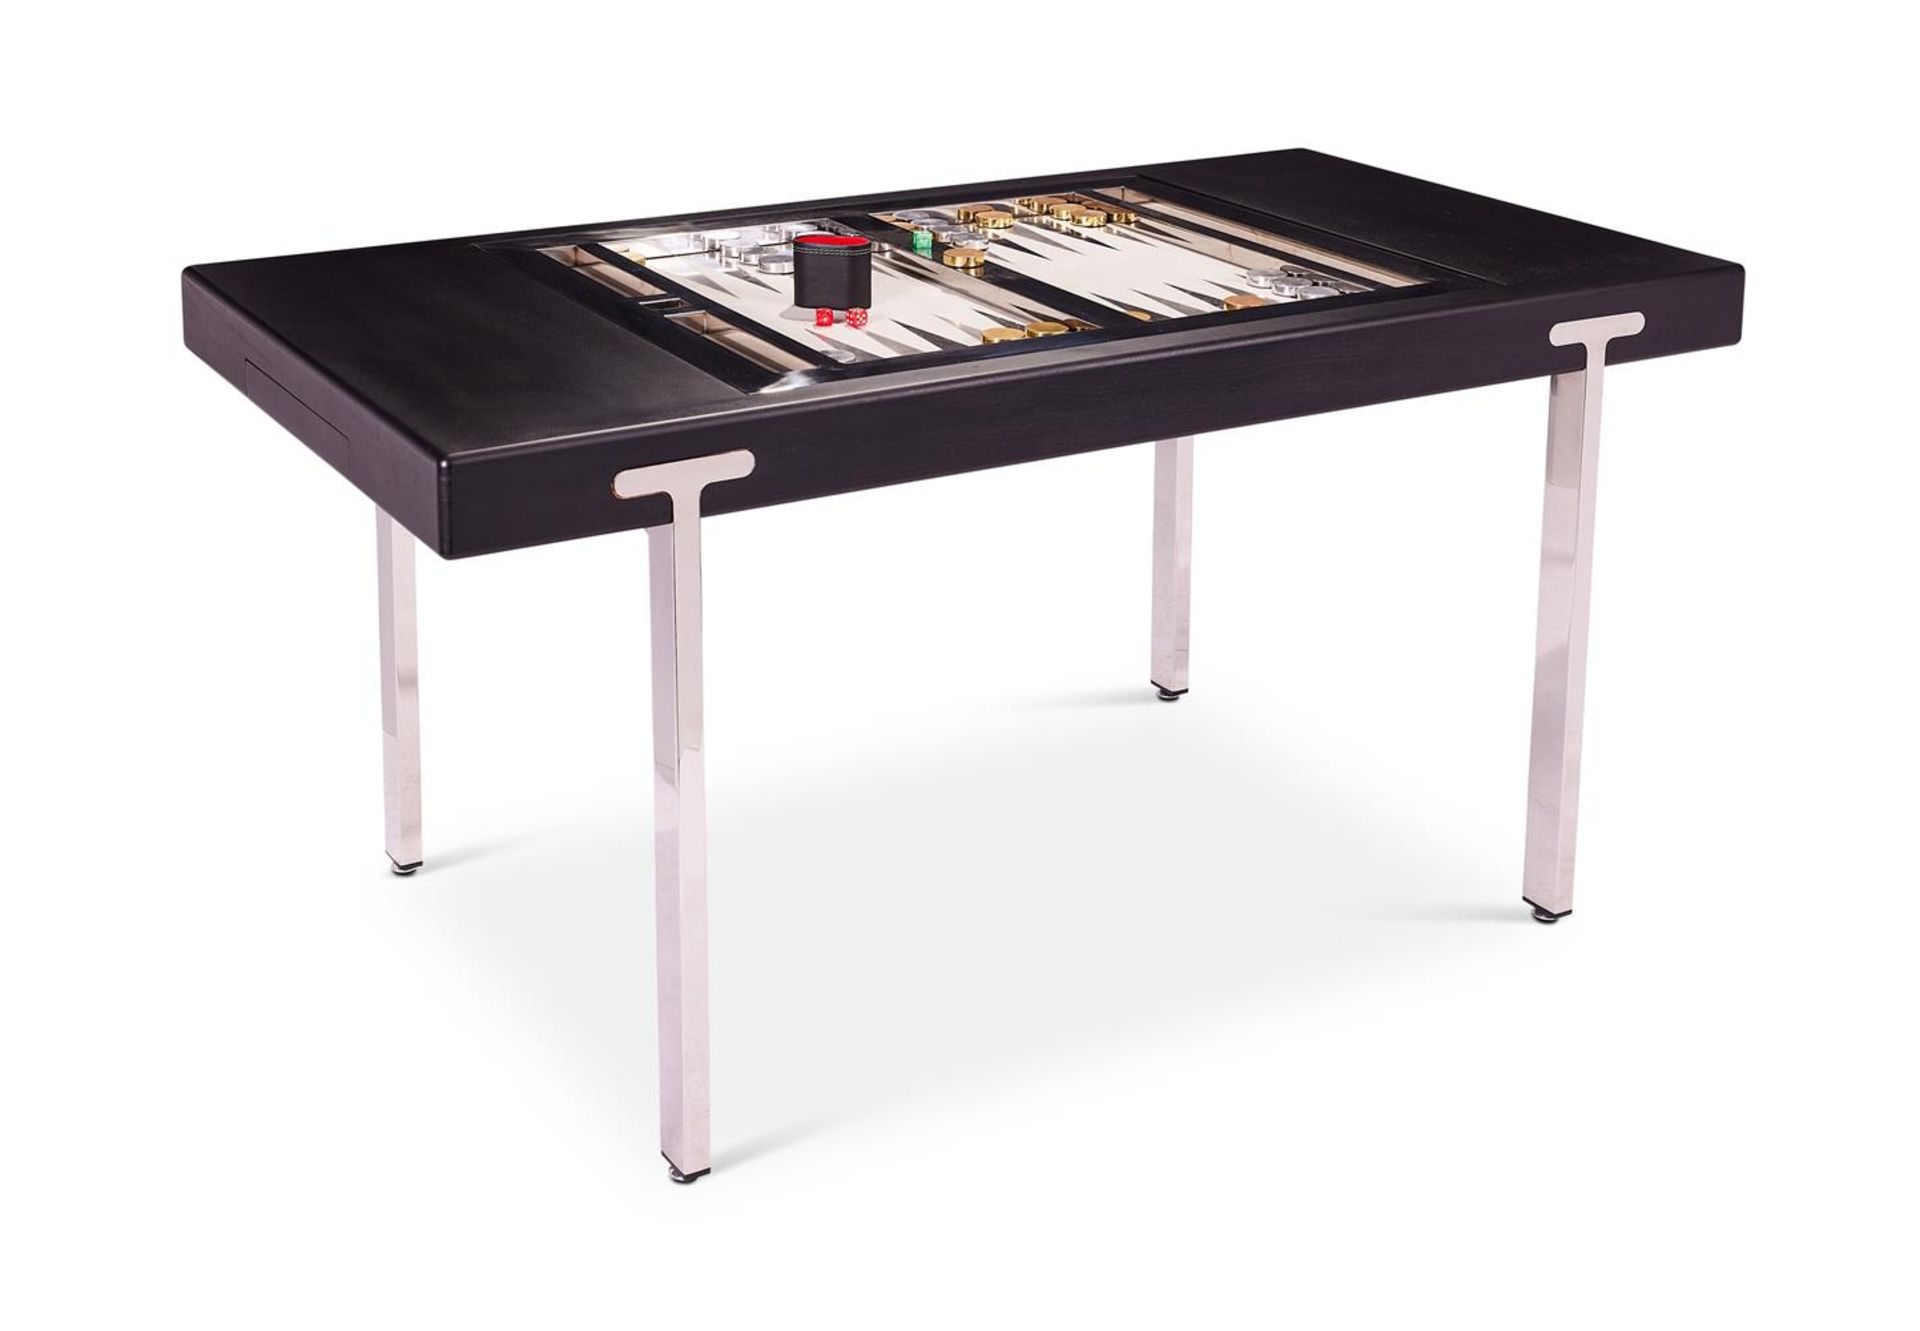 AN EBONISED AND POLISHED NICKEL REVERSABLE TOP BACKGAMMON TABLE, BY KEN BOLAN